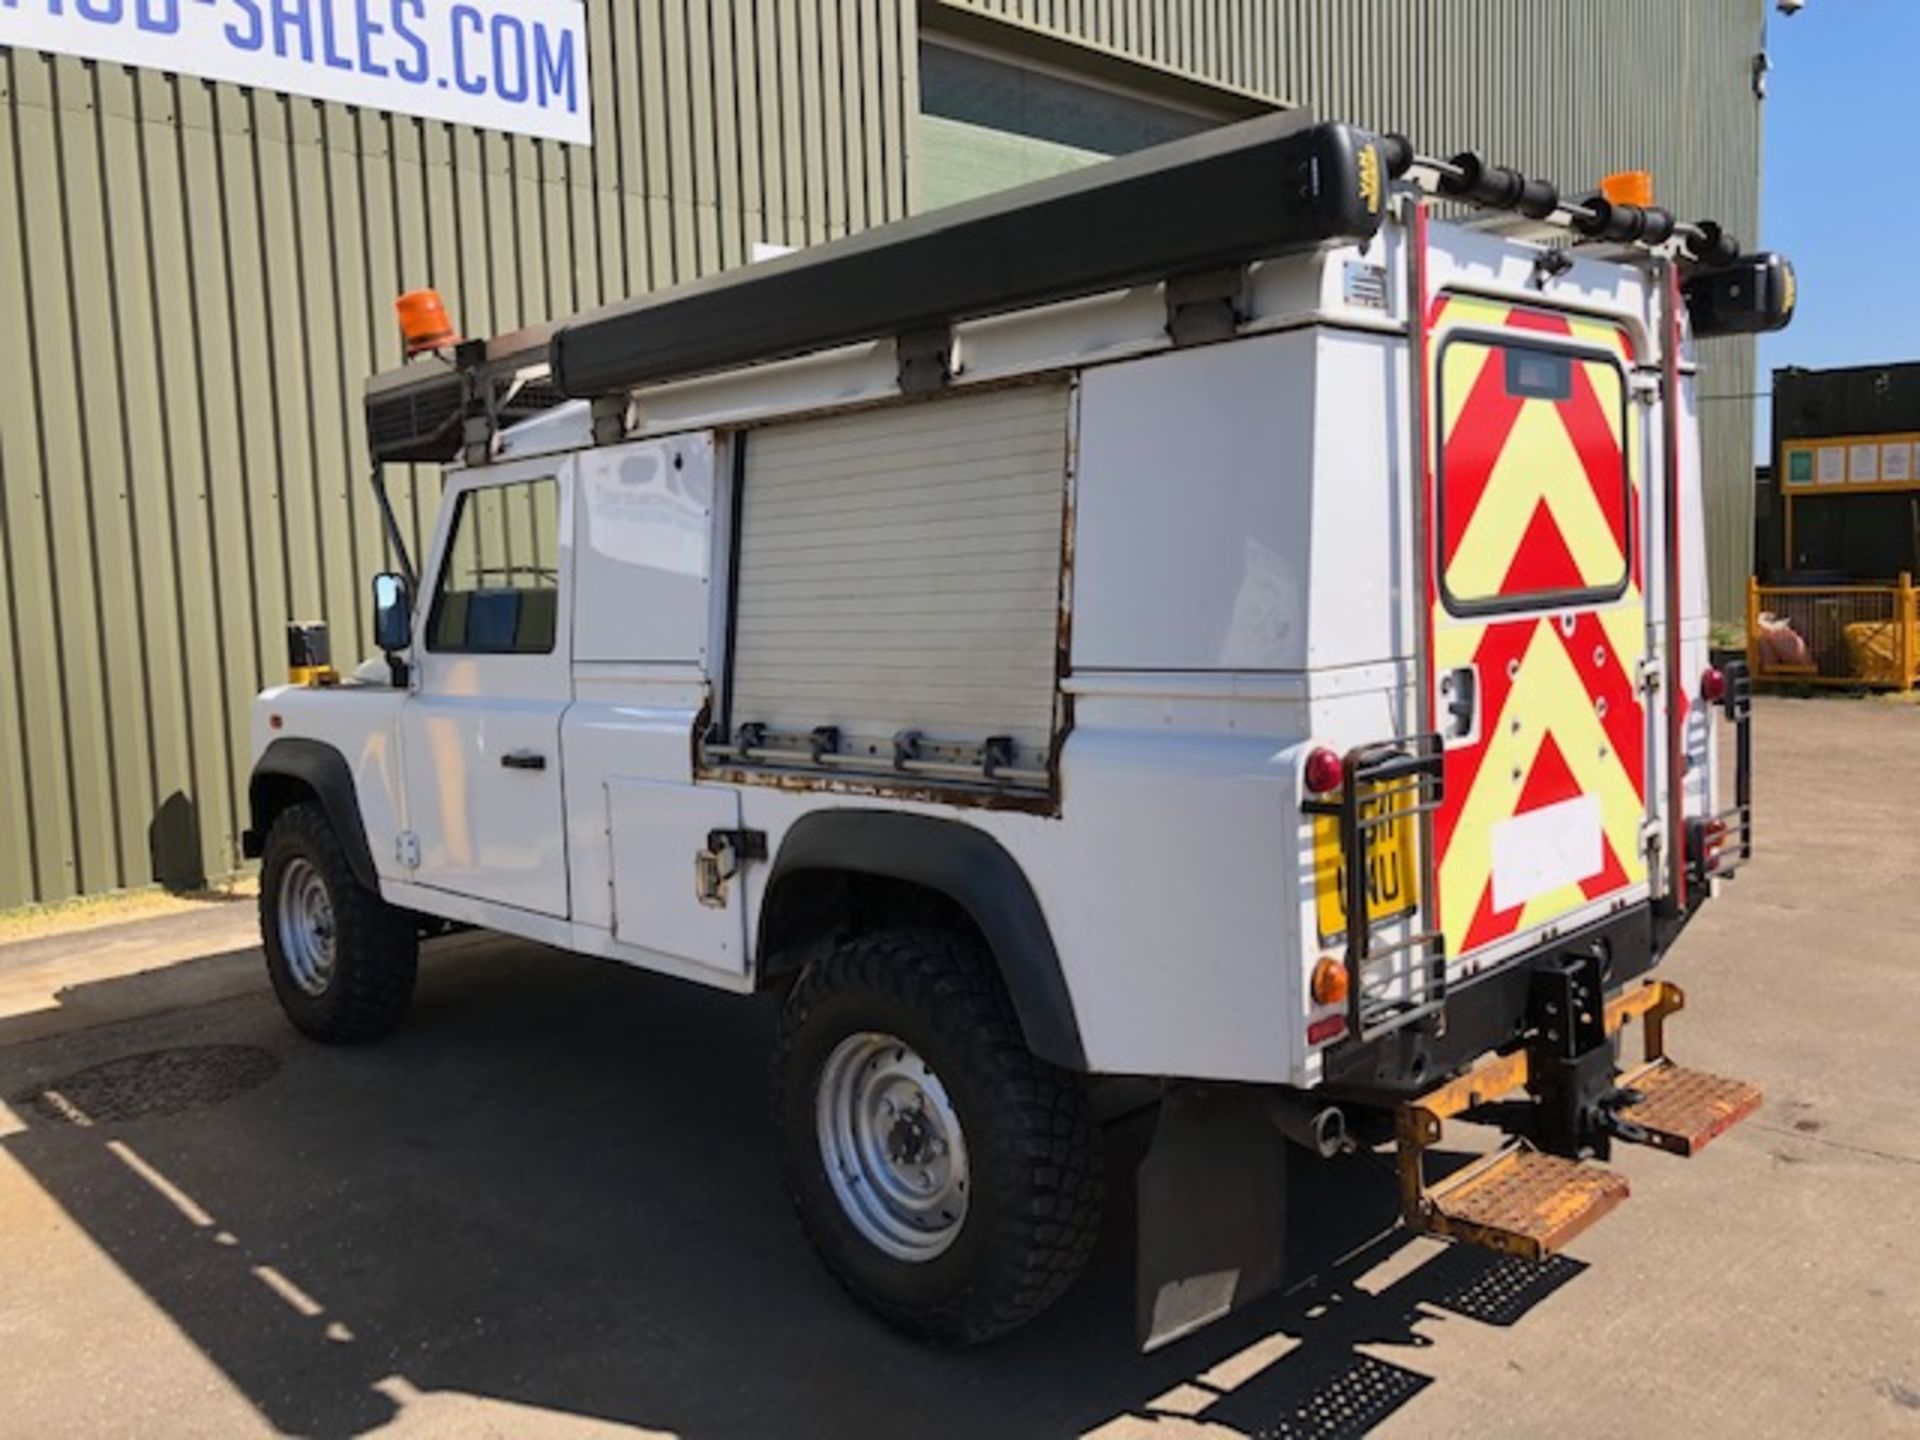 2011 Land Rover Defender 110 Puma hardtop 4x4 Utility vehicle (mobile workshop) with hydraulic winch - Image 8 of 35